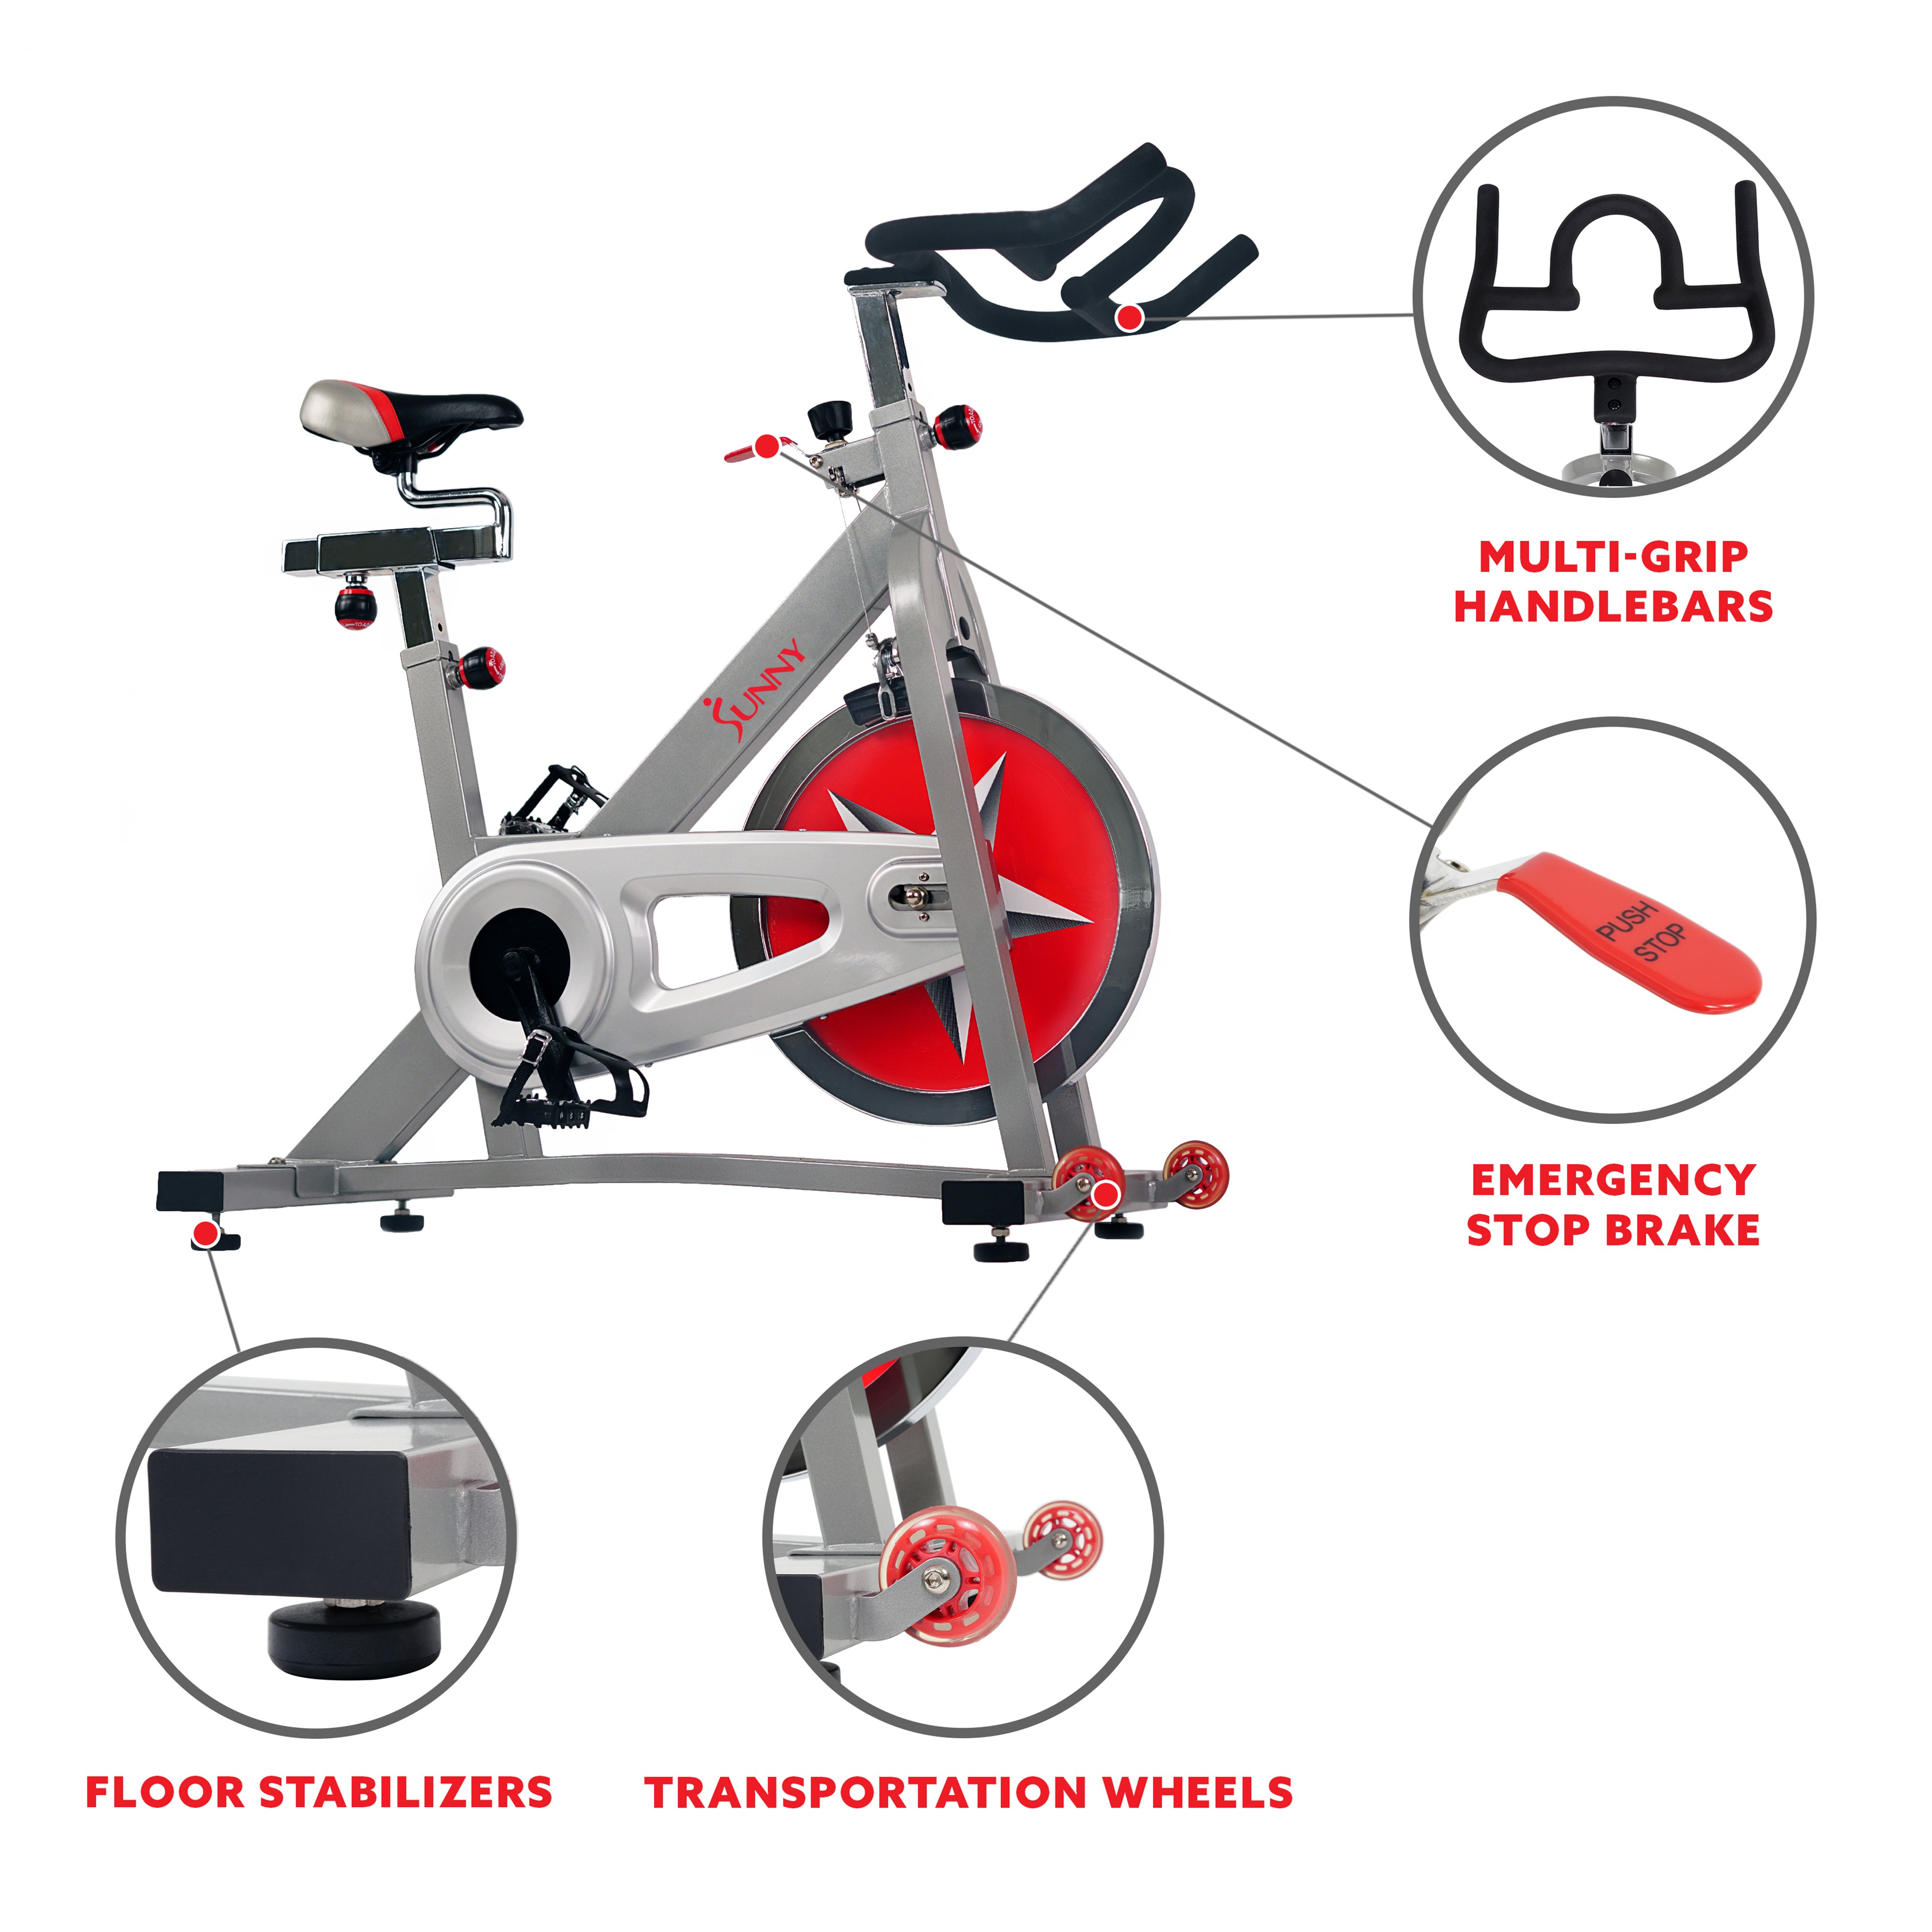 Sunny Health & Fitness Stationary Chain Drive 40 lb Flywheel Pro Indoor Cycling Exercise Bike Trainer, Workout Machine, SF-B901 - image 5 of 9